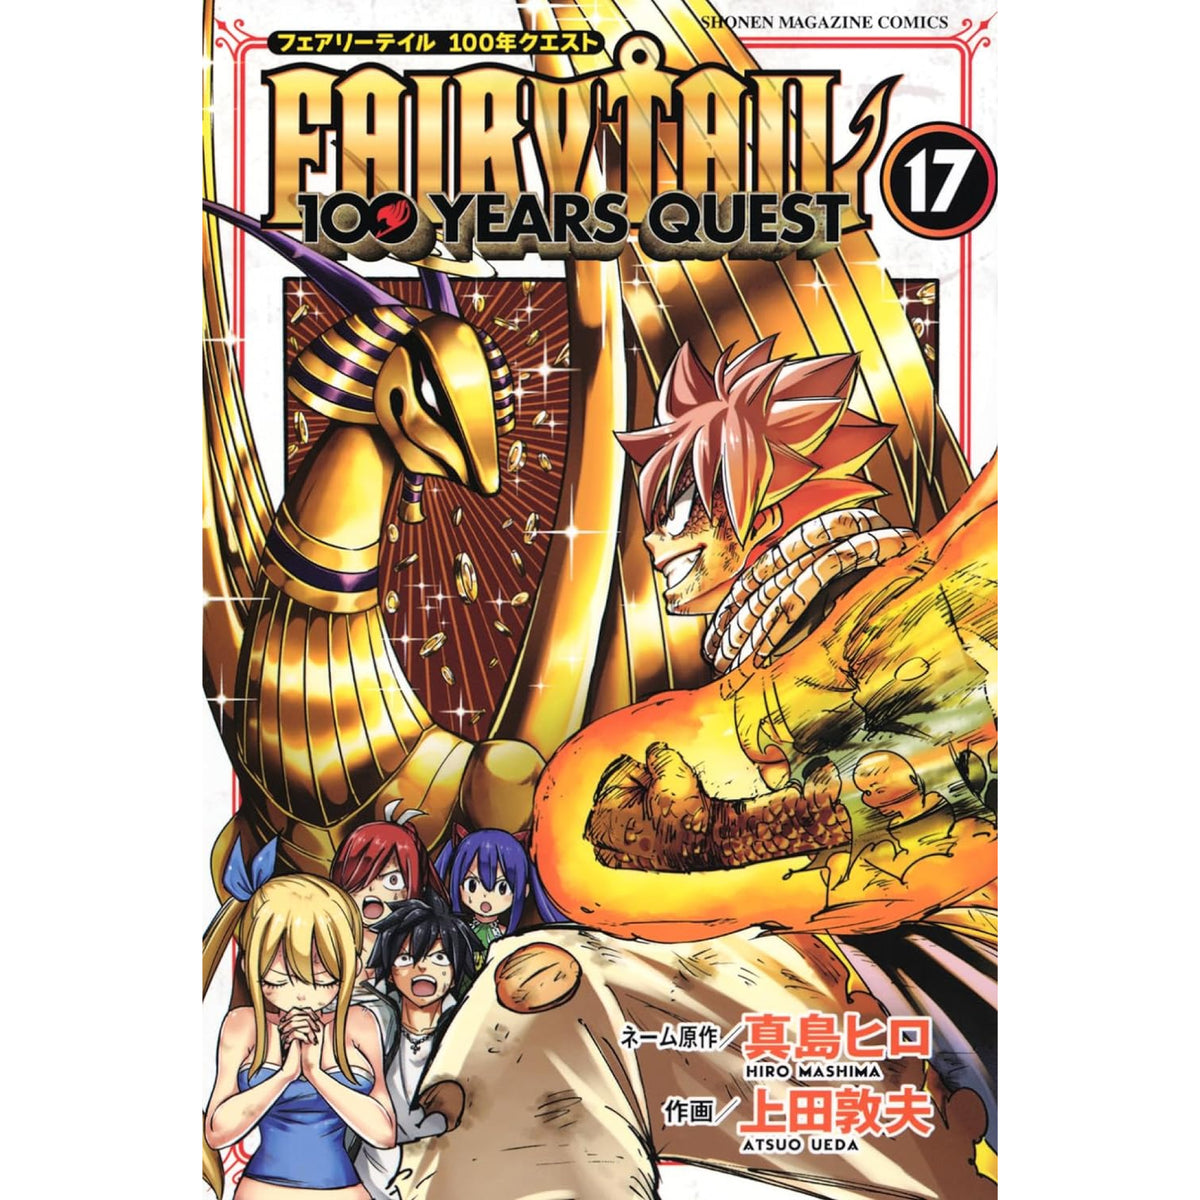 FAIRY TAIL 100 YEARS QUEST 全巻セット（1-17巻 最新刊）